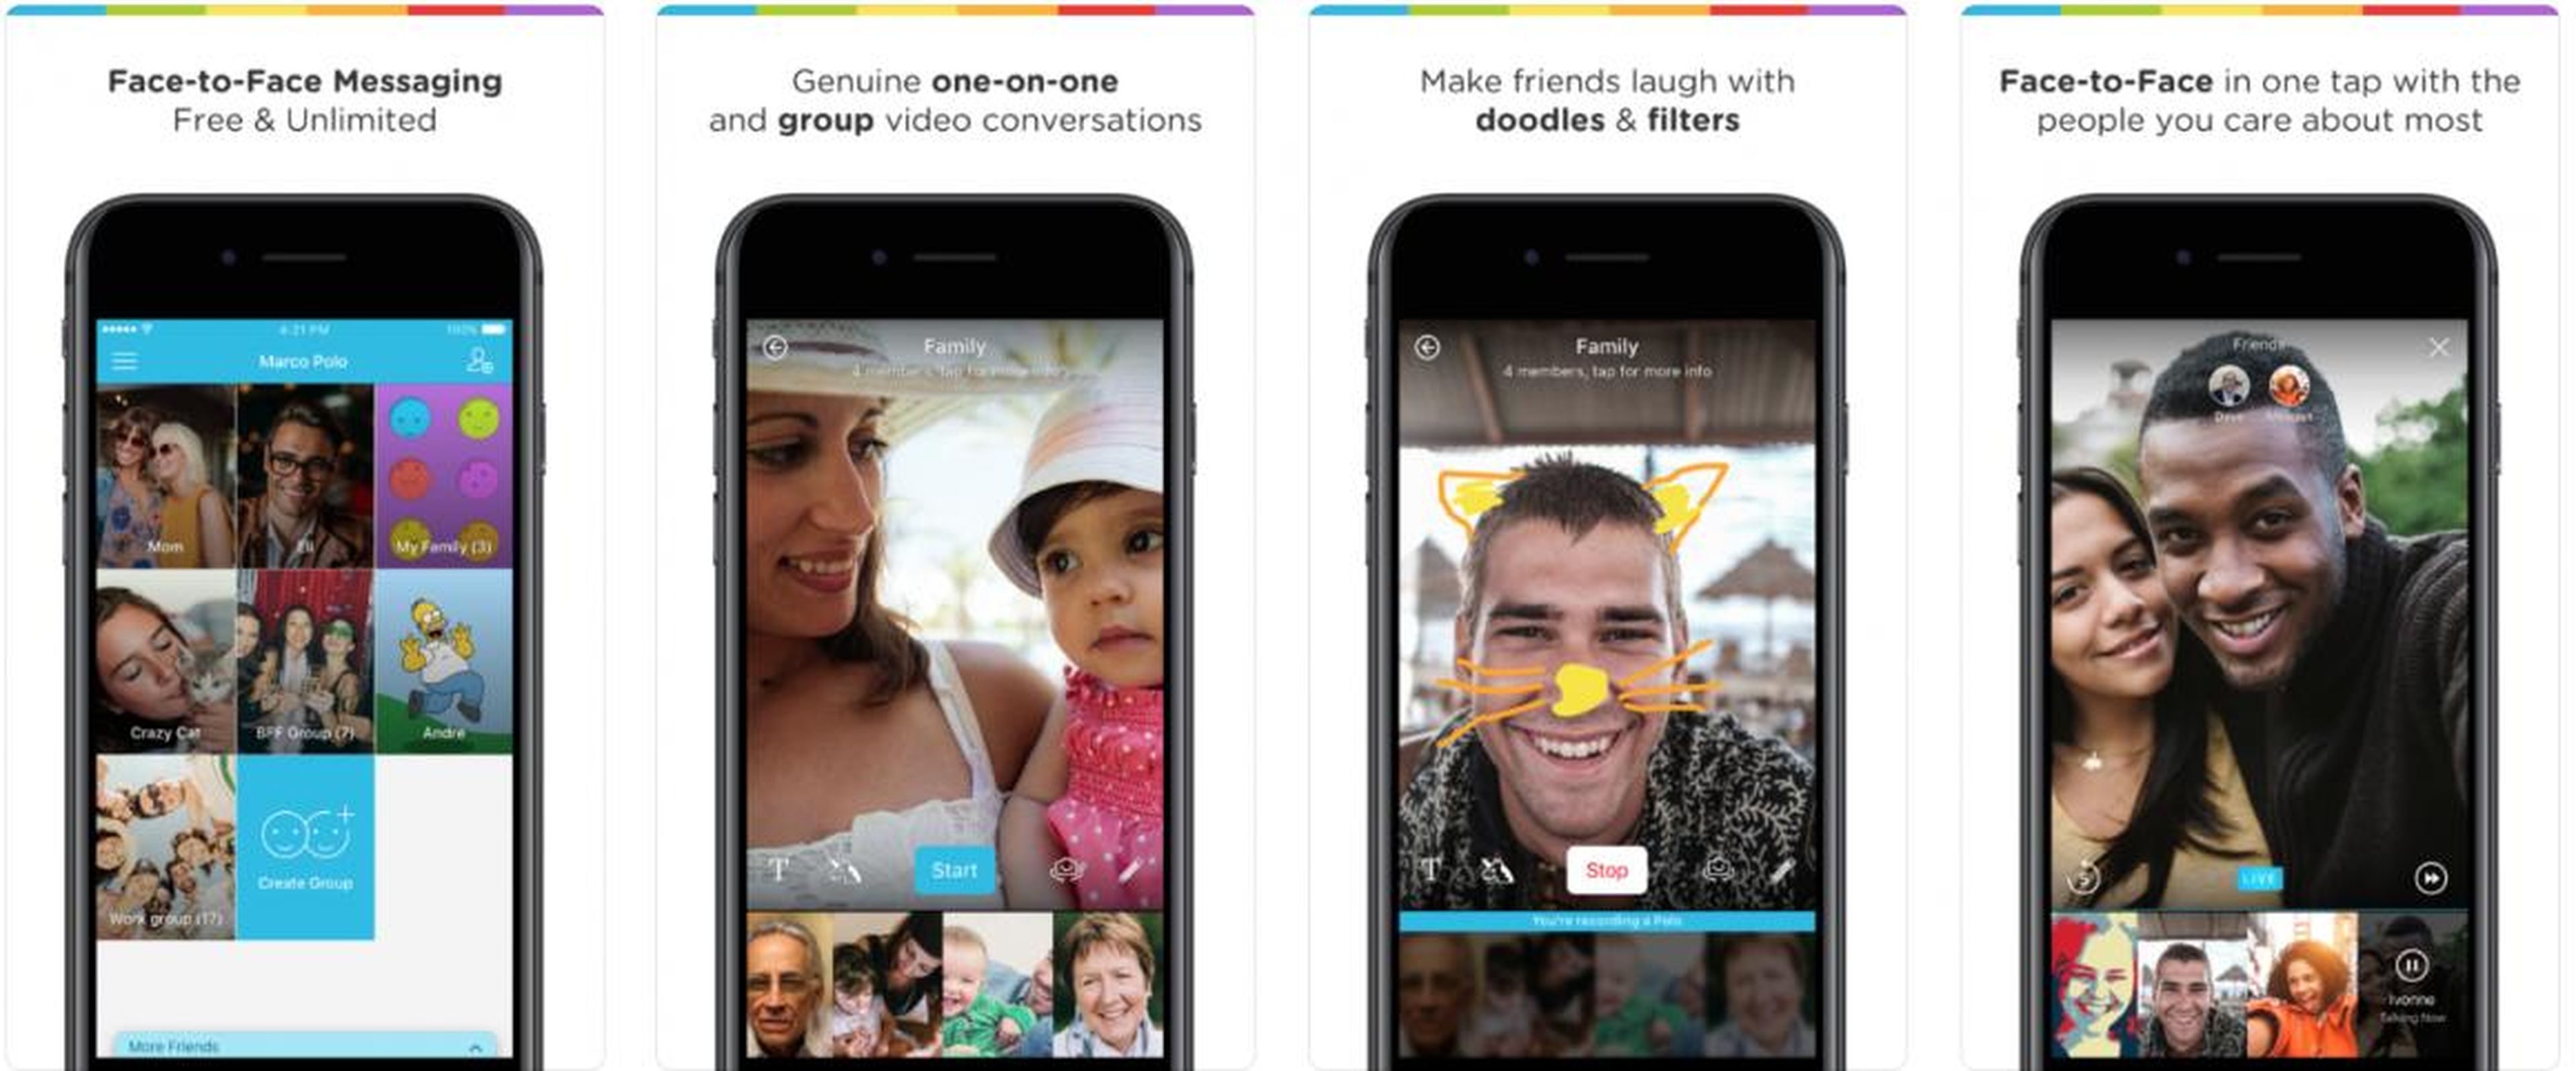 Marco Polo is a fun video-chat app that's easier to use than Snapchat.